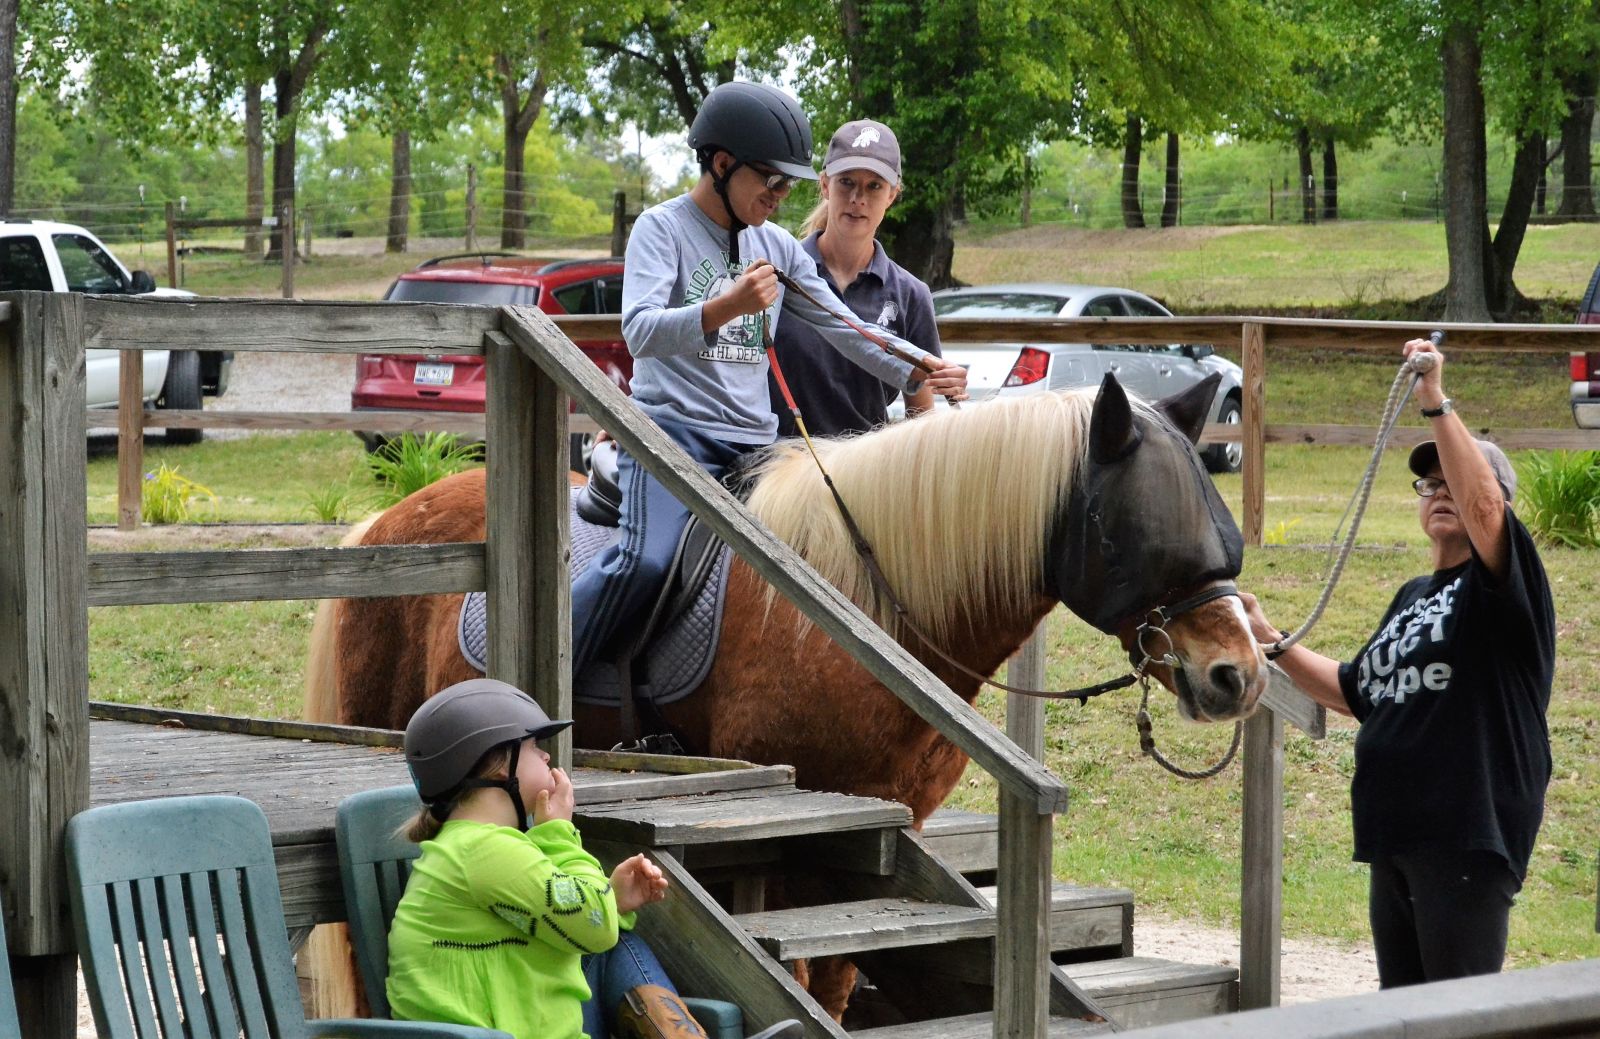 Jennifer Stoudemire, executive director and head instructor at Dream Riders in Lexington, helps Mateo Aranda get on his horse to begin a lesson. Leading Mateo is volunteer Rosie Brooks. (Photo/Travis Boland)